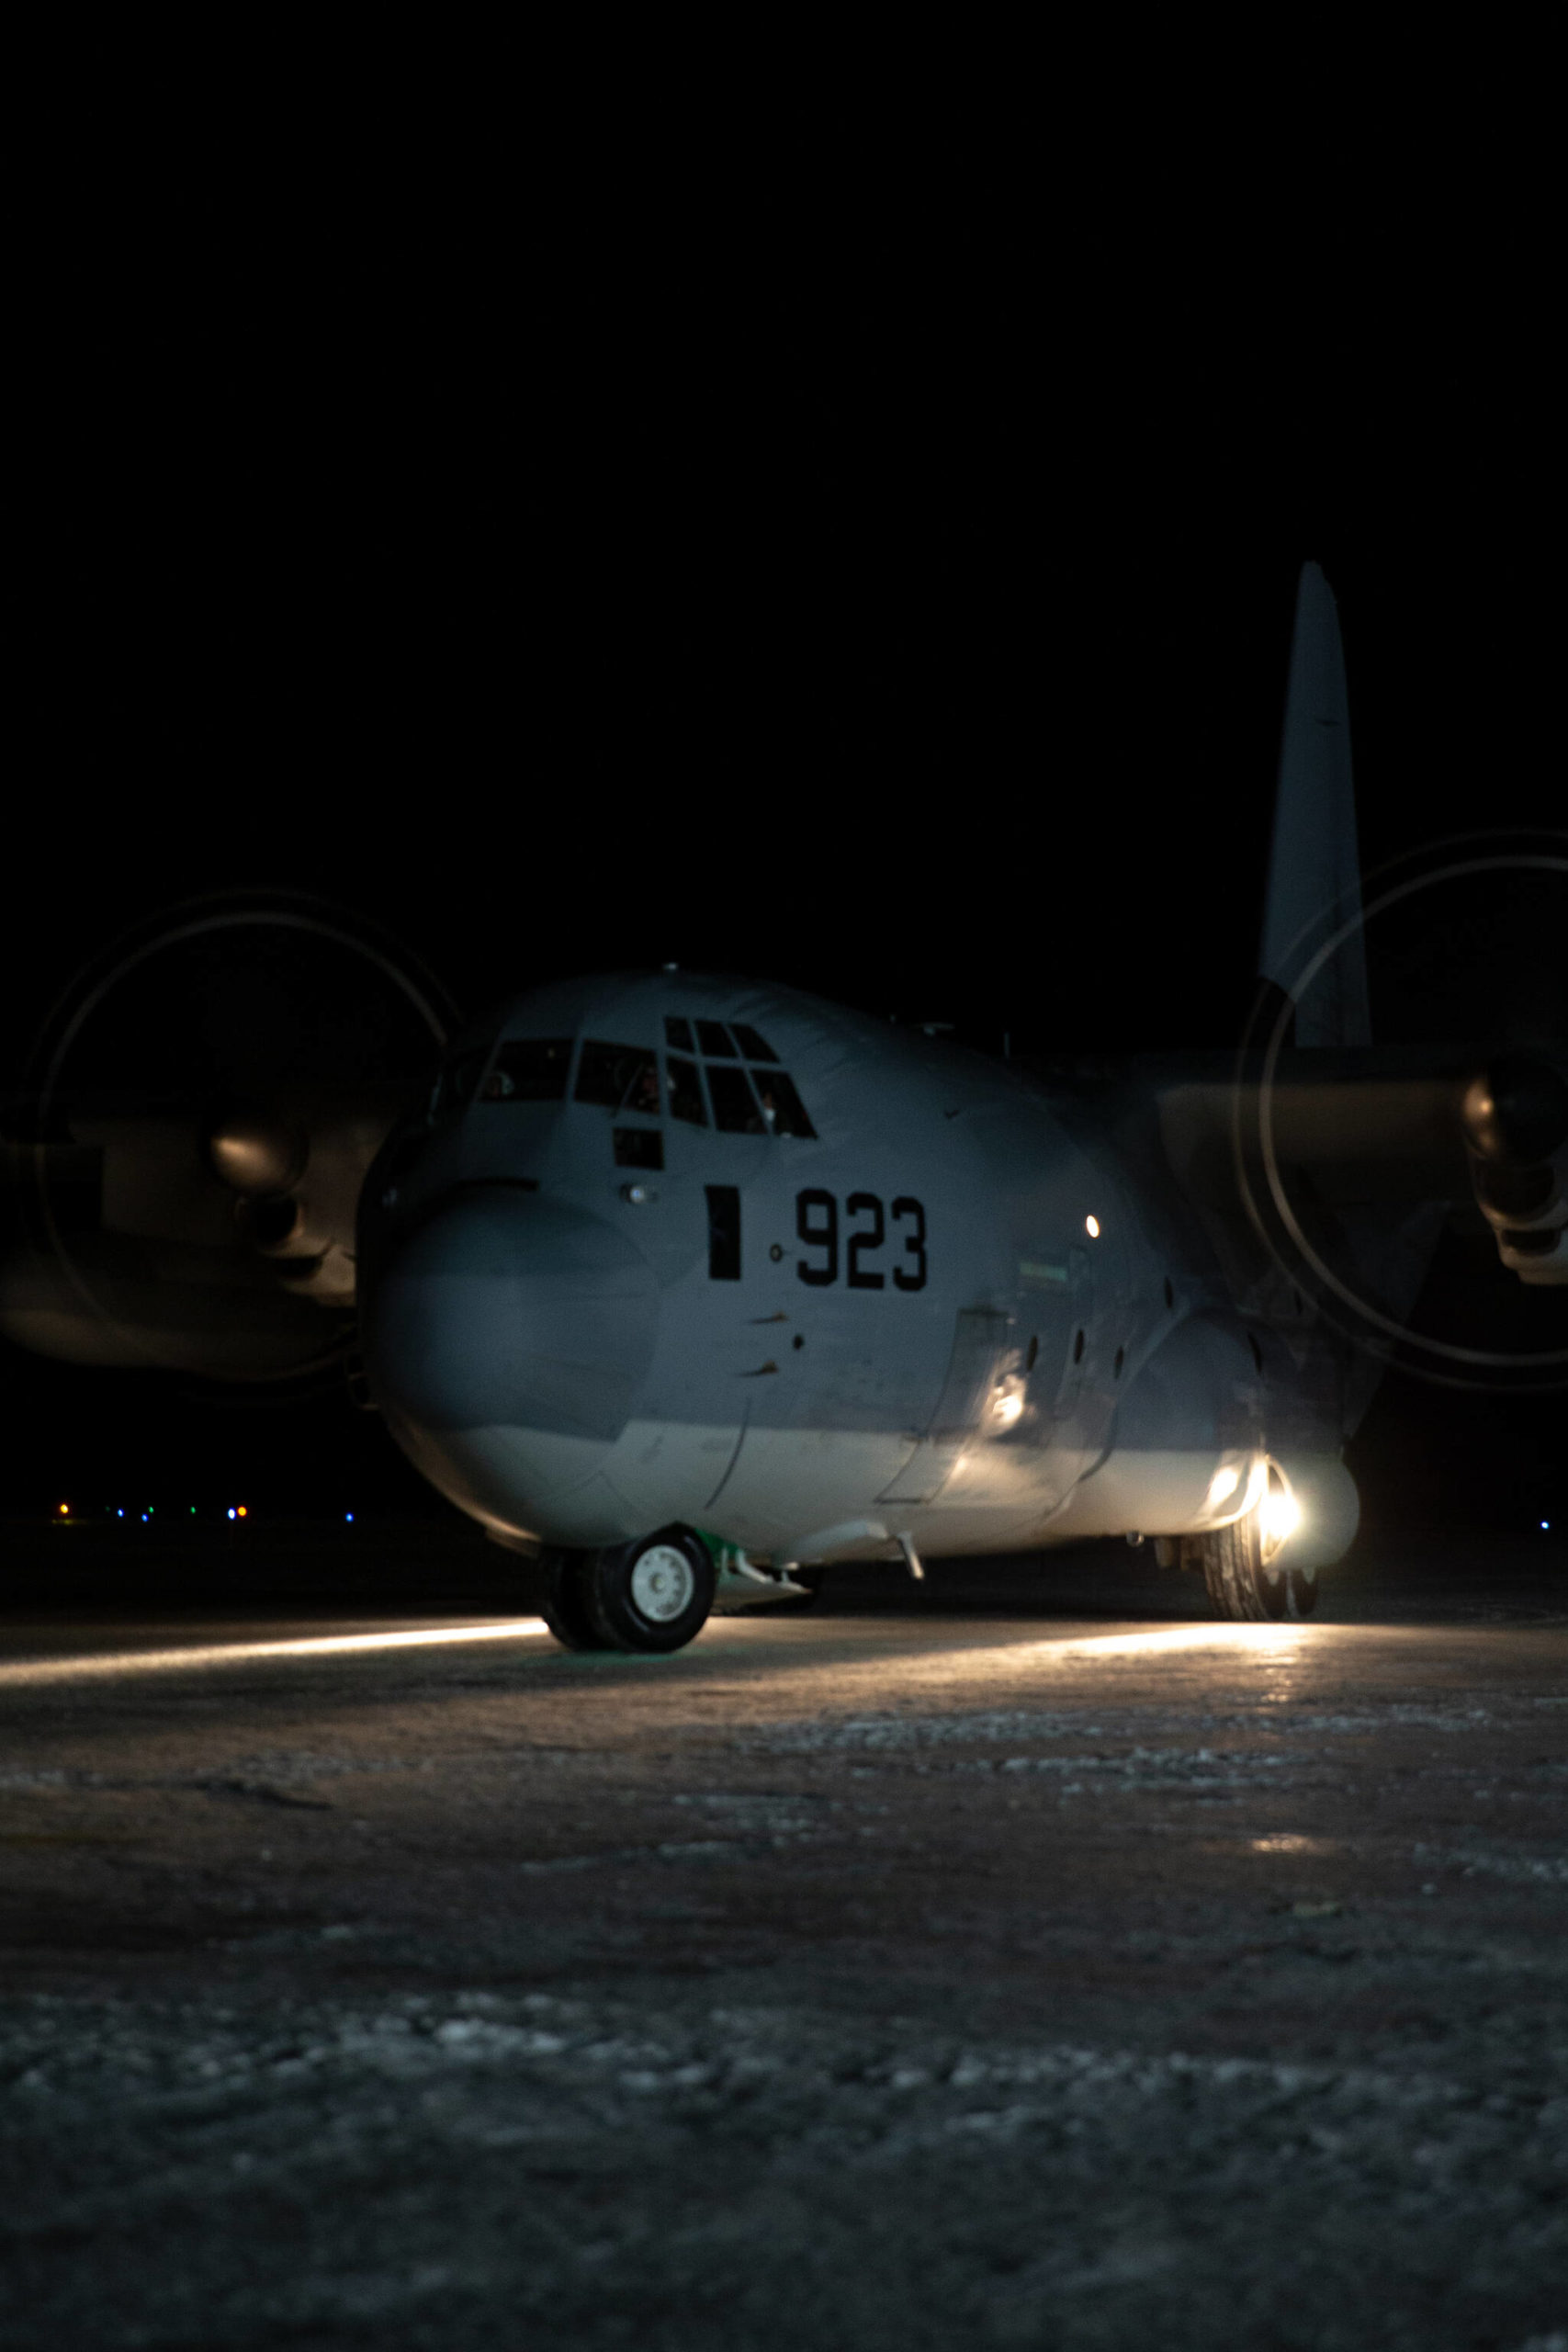 A U.S. Marine Corps KC-130J Super Hercules assigned to Marine Aerial Refueler Transport Squadron 152, 1st Marine Aircraft Wing, taxis the runway to deliver the snowmobiles and gear in support of Marines with Delta Company, 4th Law Enforcement Battalion, Marine Forces Reserve at Kotzebue, Alaska, Dec. 8, 2021. (U.S. Marine Corps / Cpl. Brendan Mullin)